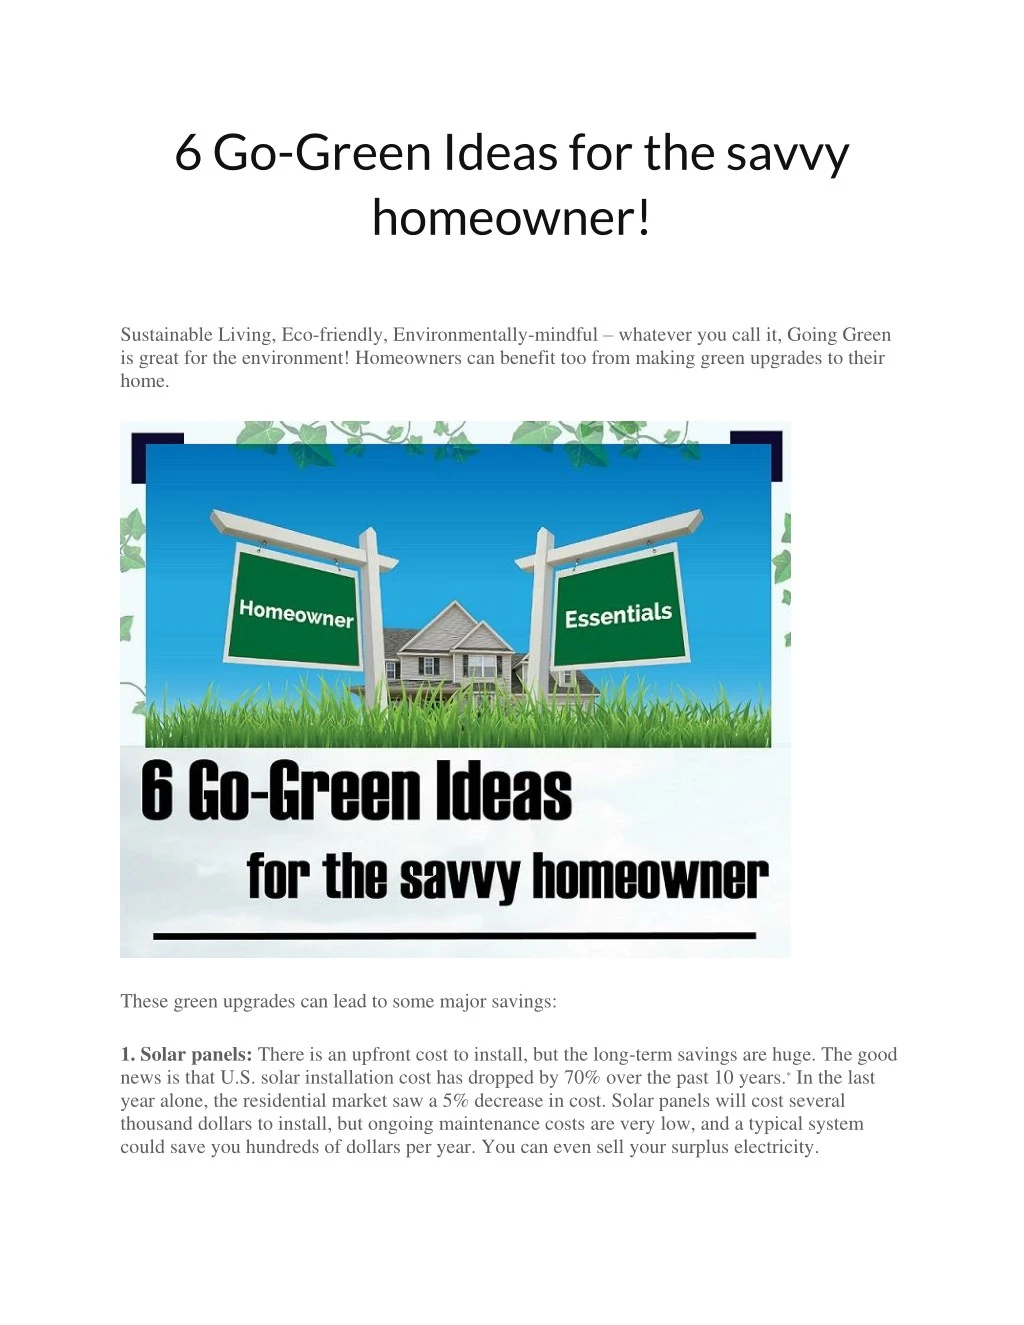 6 go green ideas for the savvy homeowner